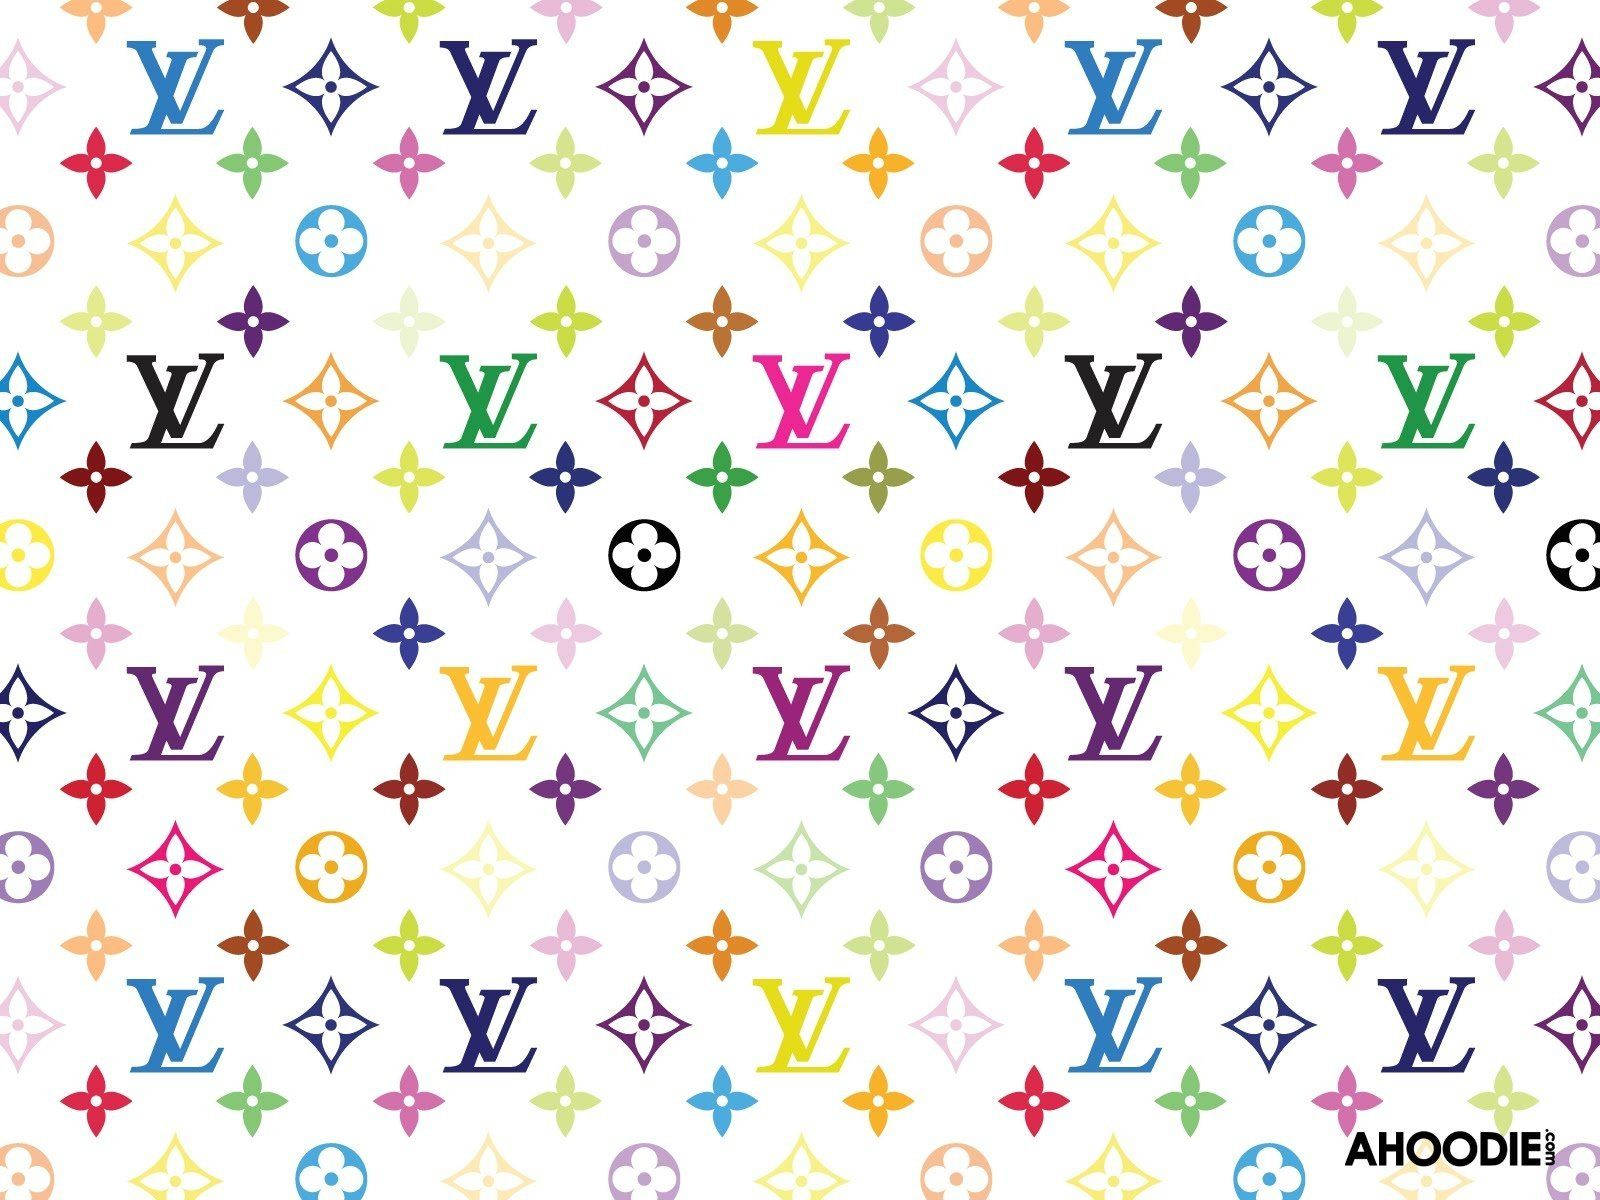 1600X1200 Louis Vuitton Wallpaper and Background